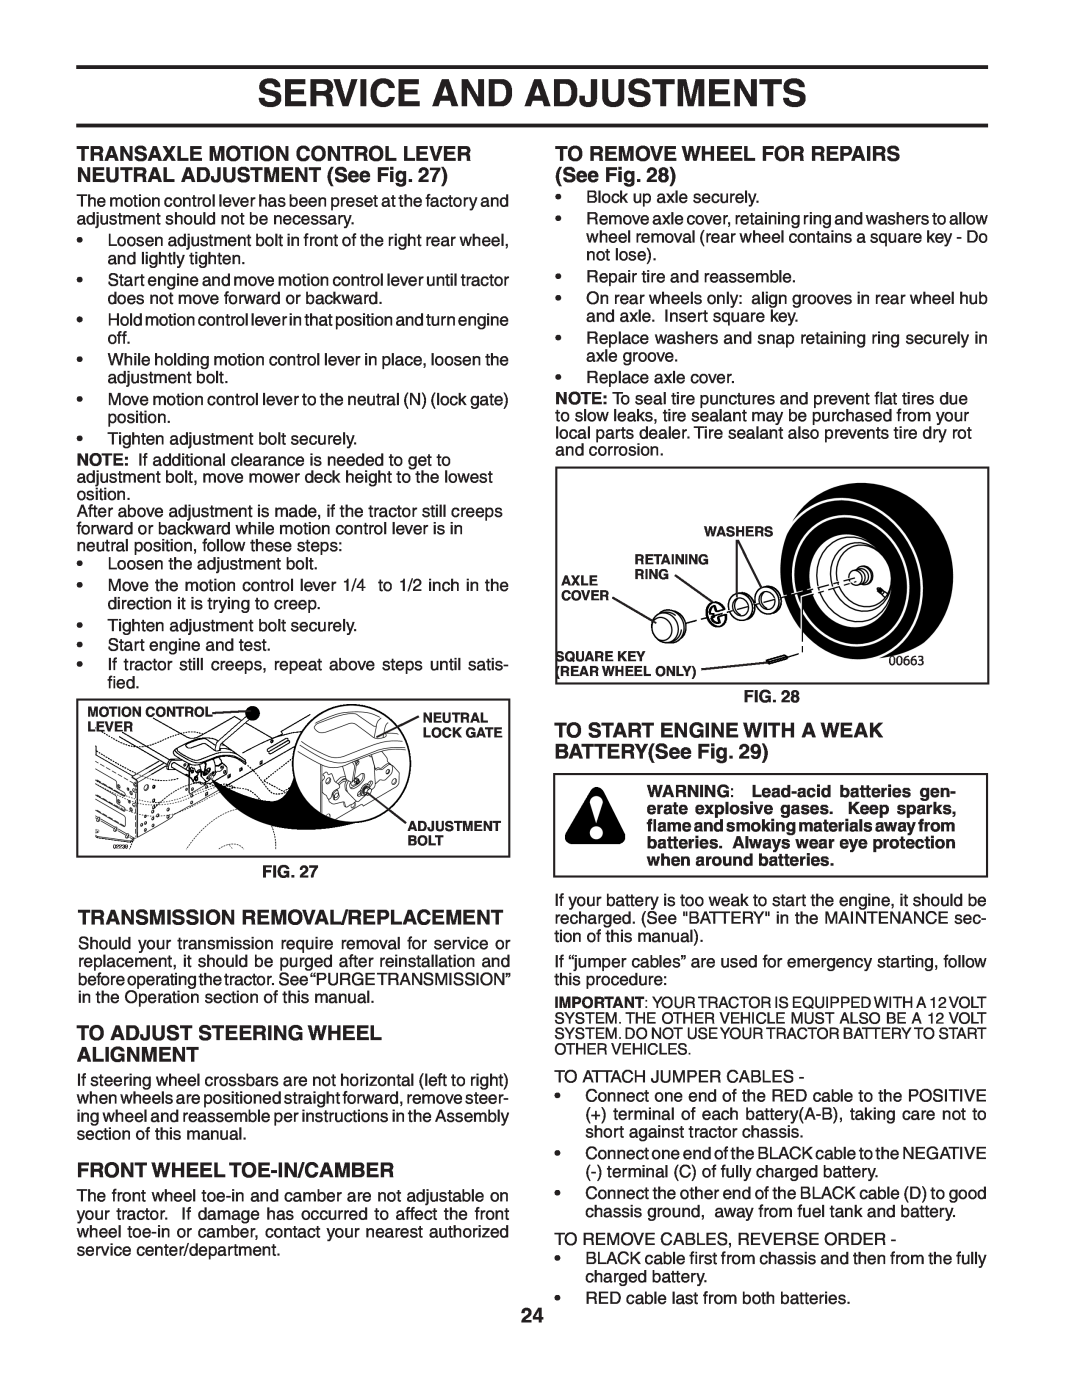 Husqvarna YTH2248 TO REMOVE WHEEL FOR REPAIRS See Fig, Transmission Removal/Replacement, Front Wheel Toe-In/Camber 